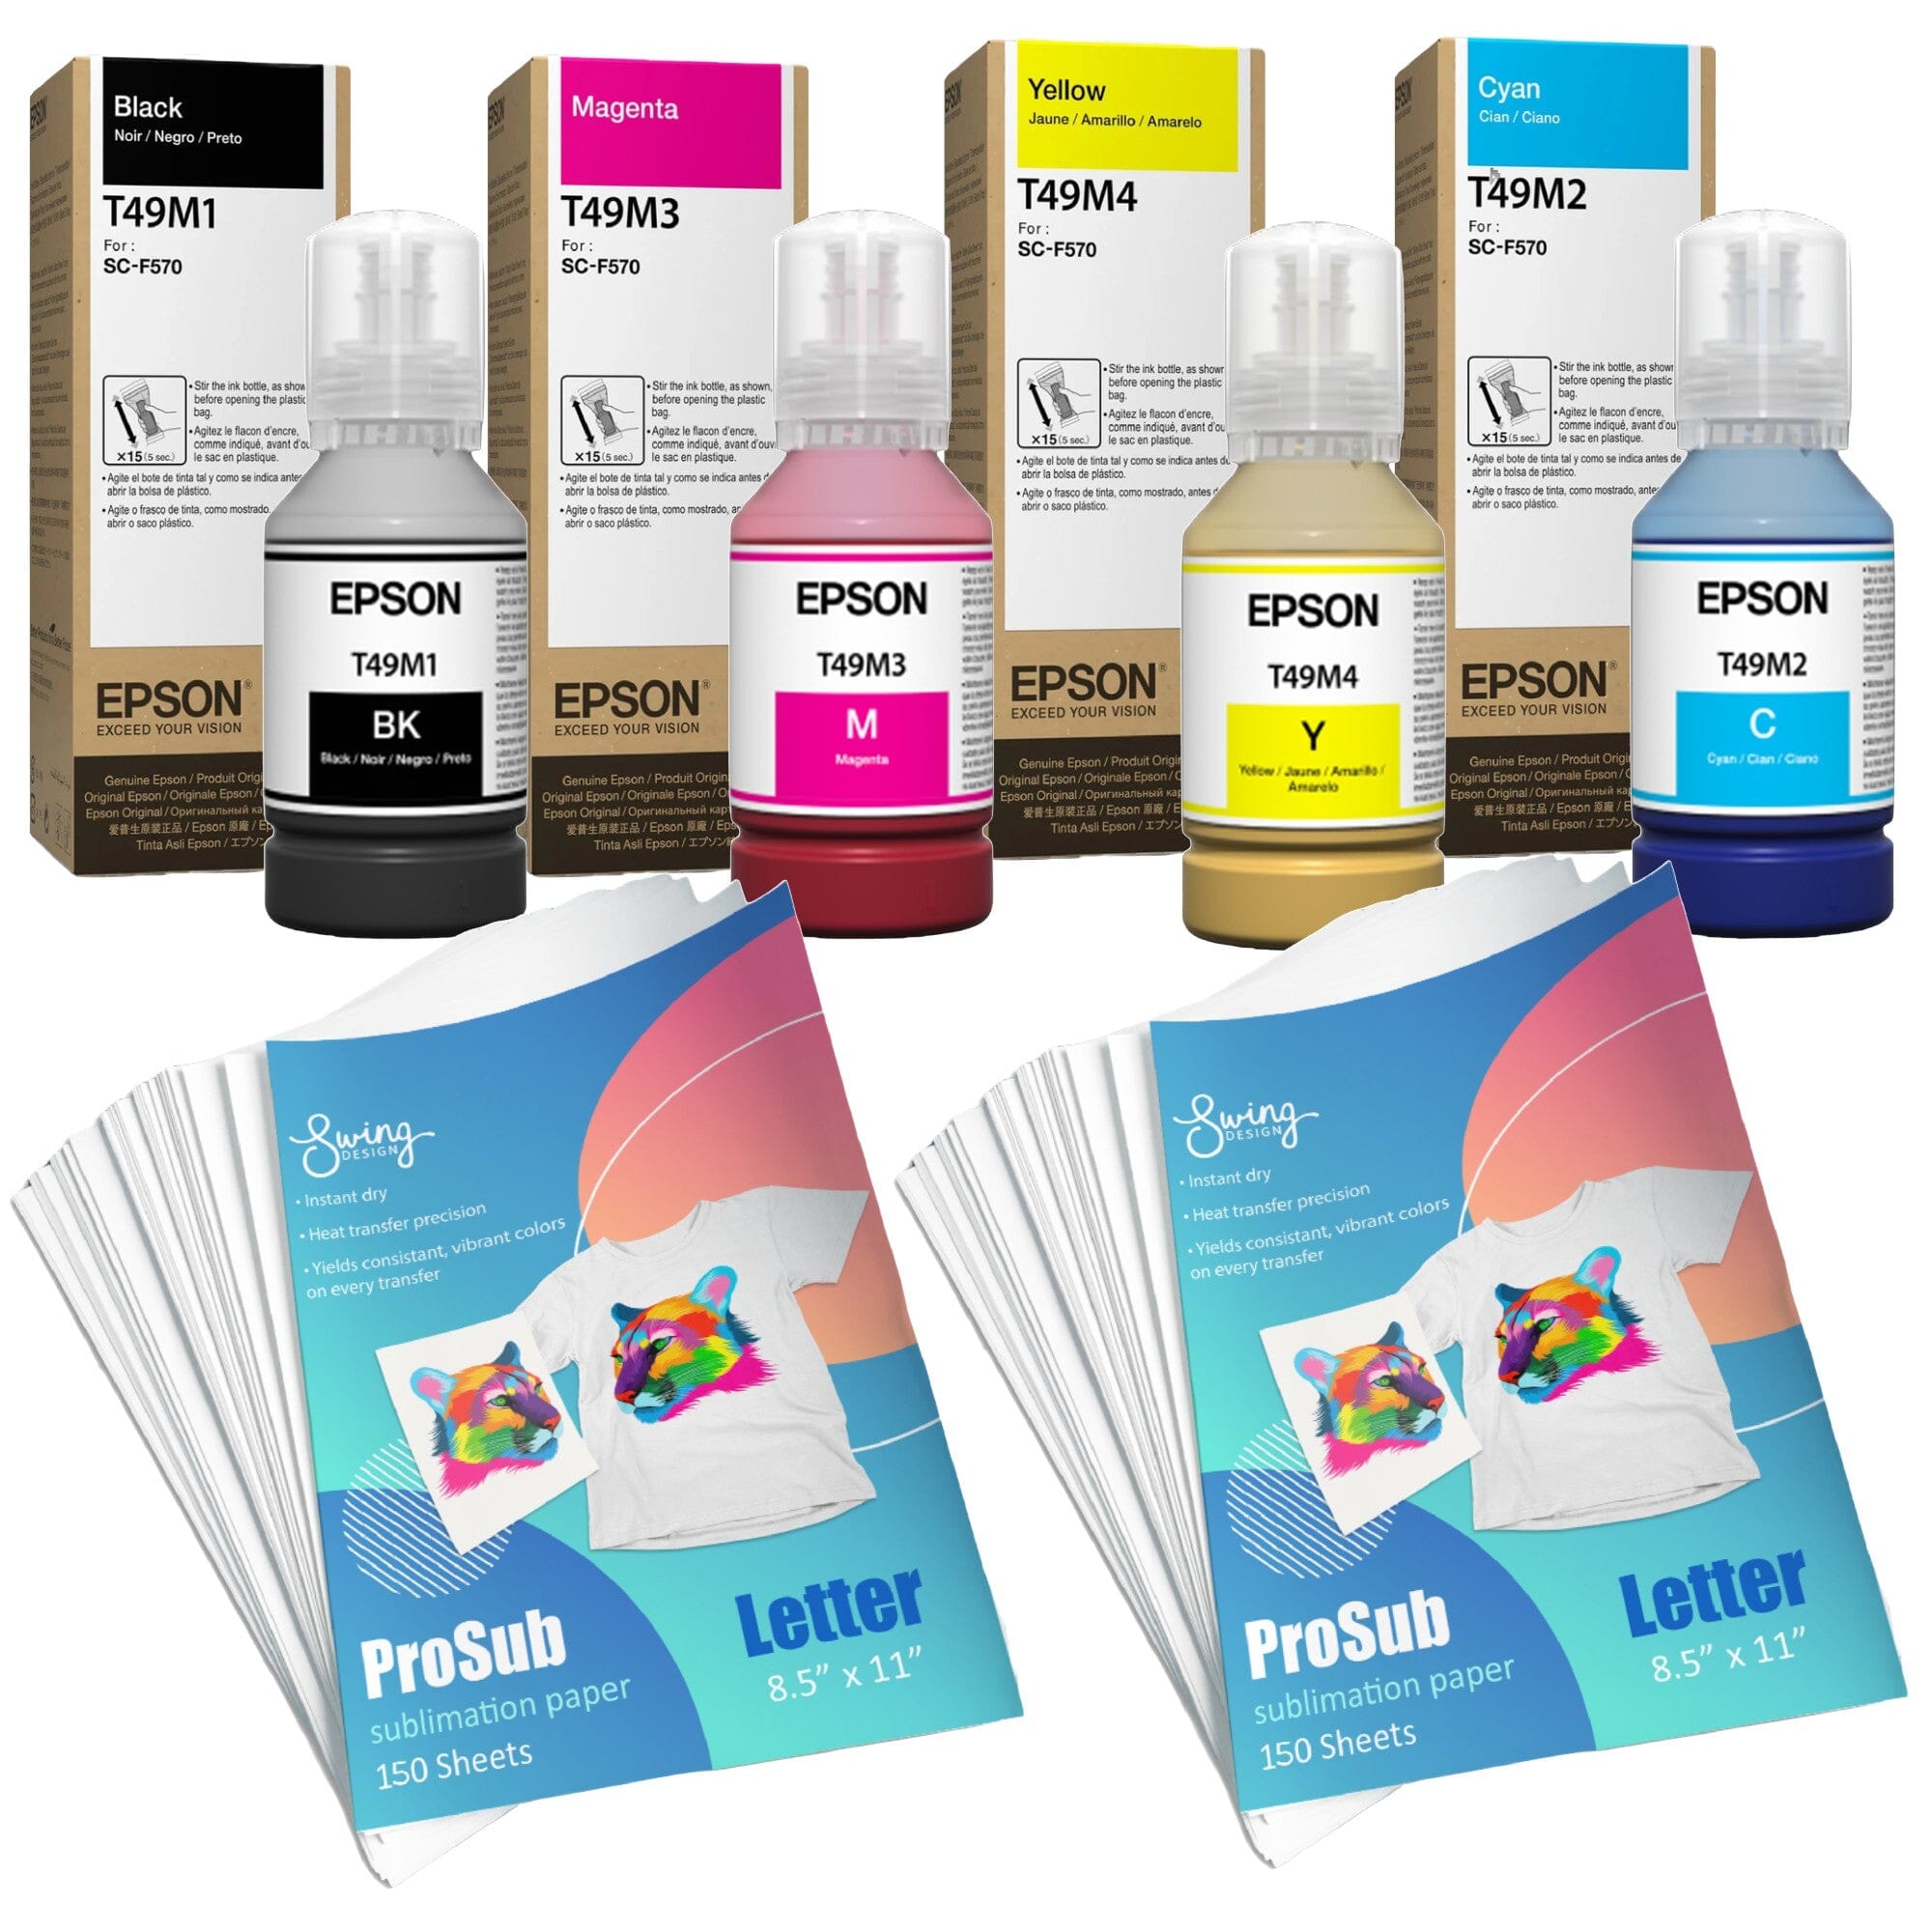 Epson Ink Set For F170 & F570 - 4 Pack with 300 Sheets of Sublimation Paper